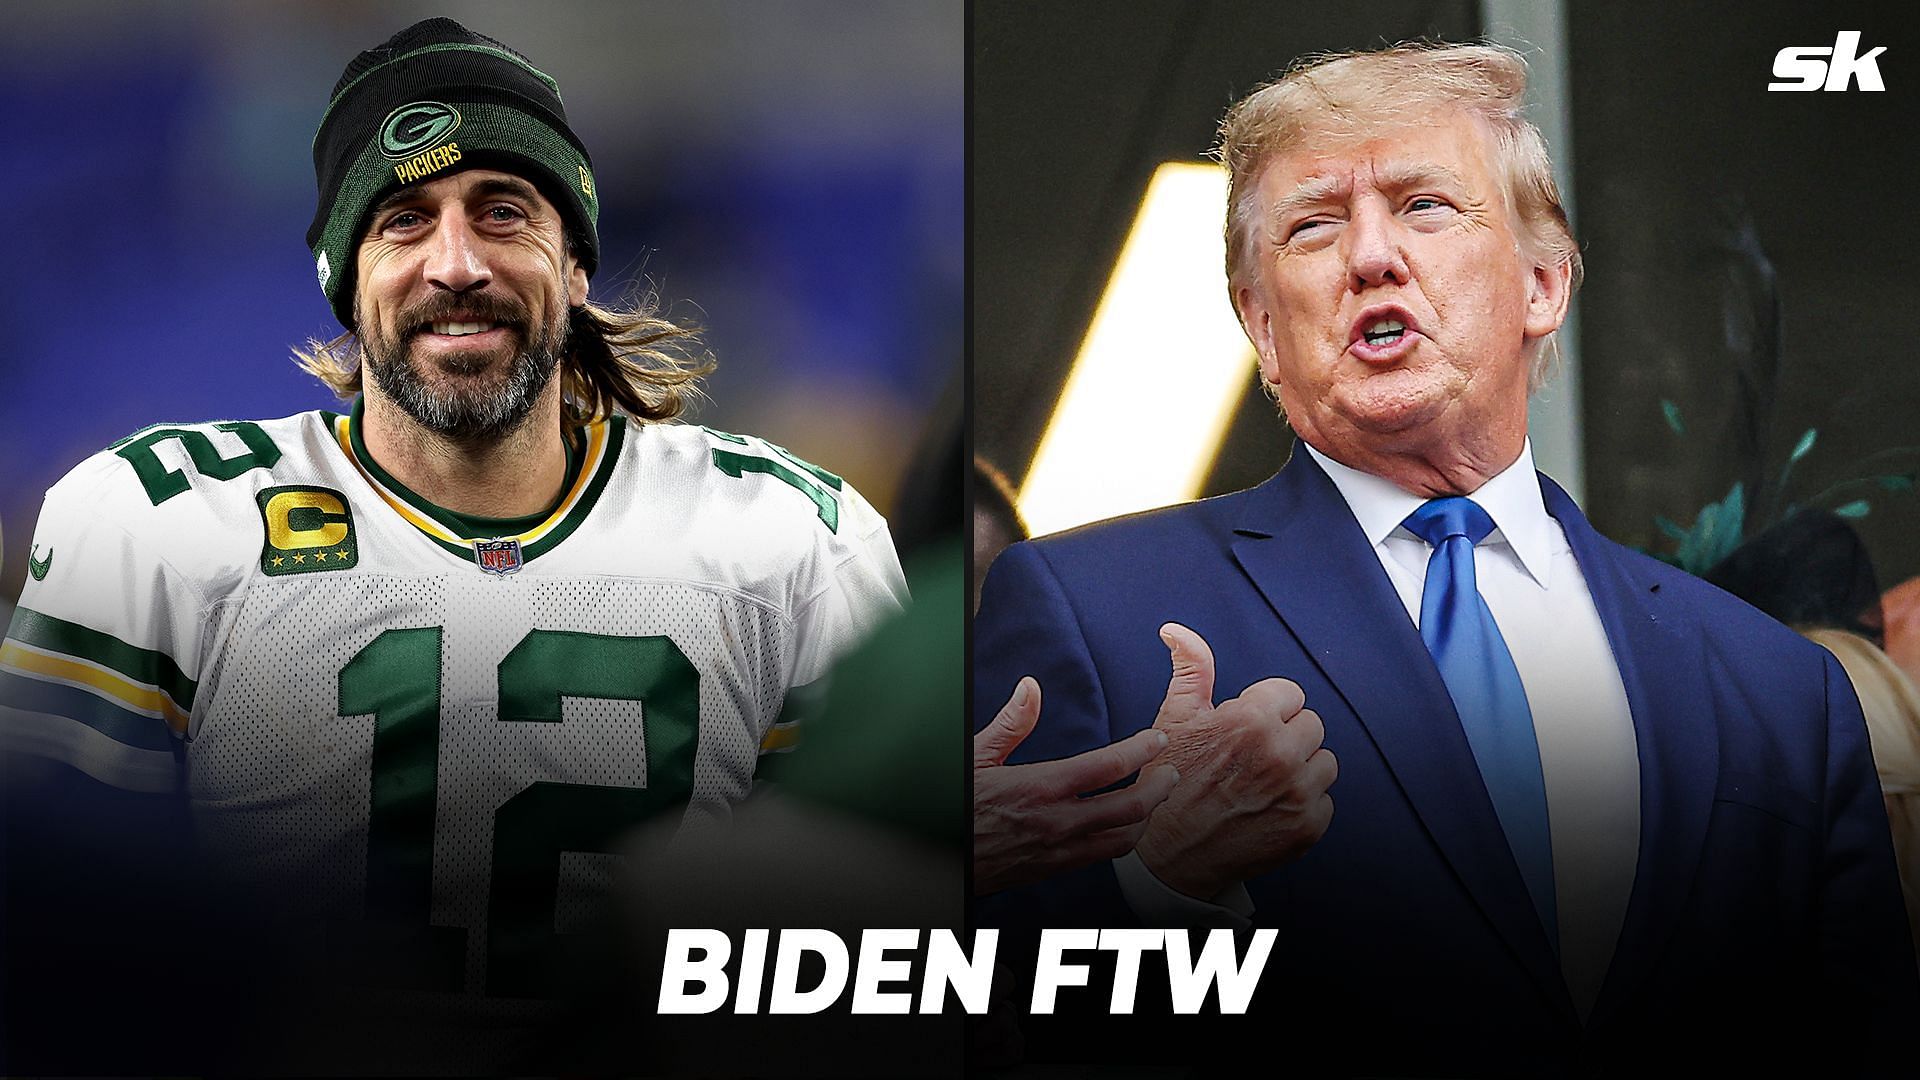 Aaron Rodgers brutally roasts Donald Trump for post election antics